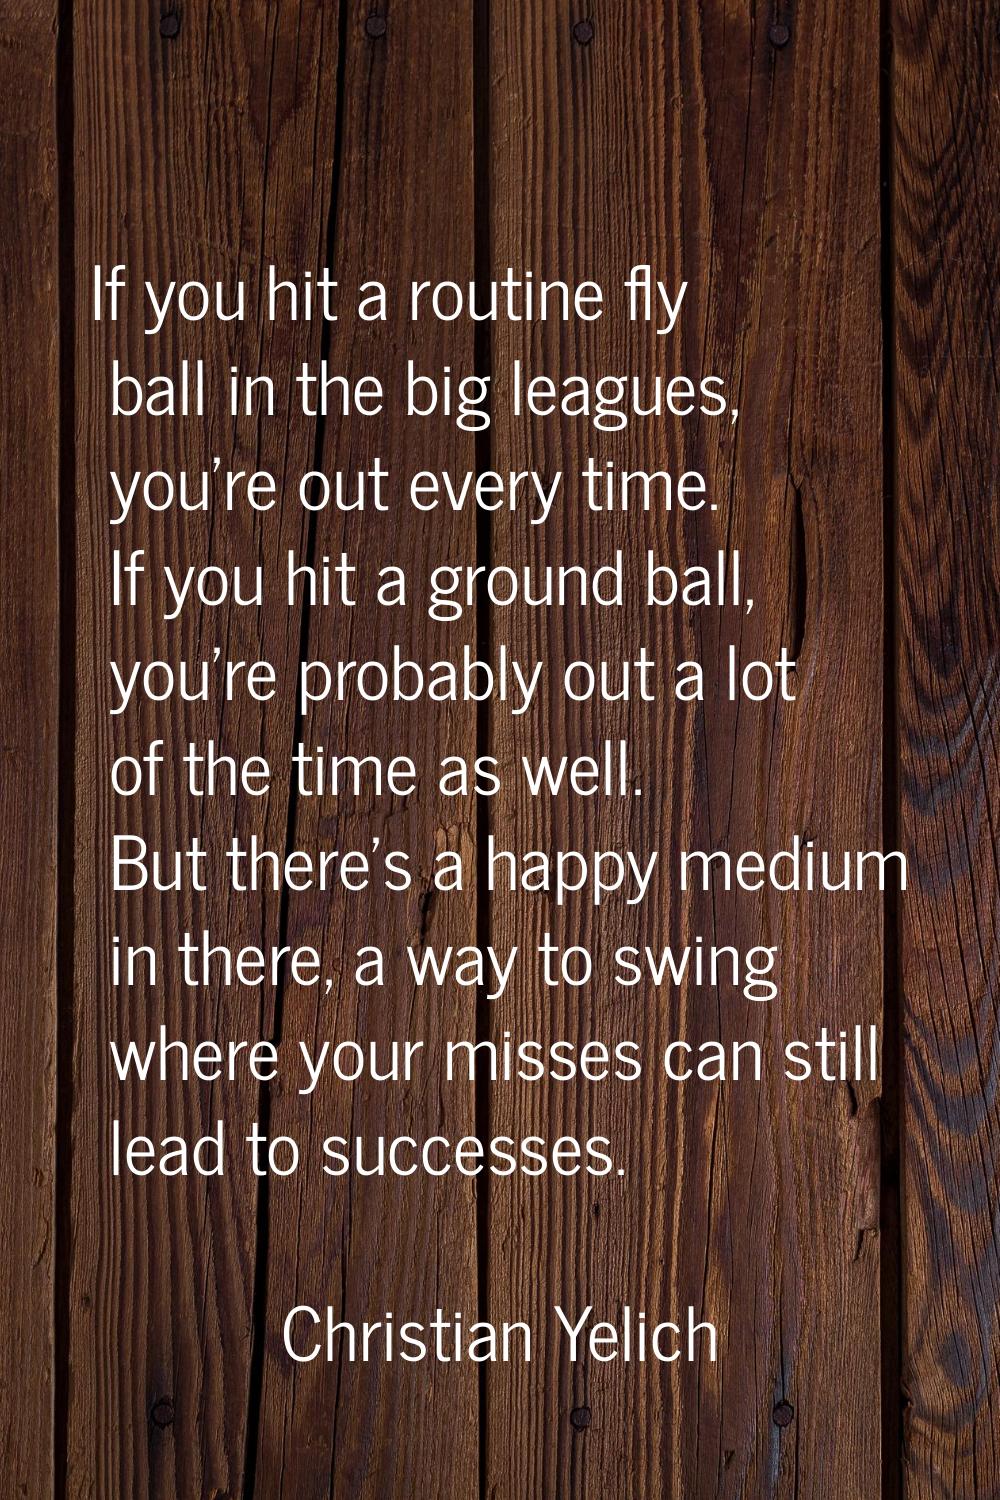 If you hit a routine fly ball in the big leagues, you're out every time. If you hit a ground ball, 